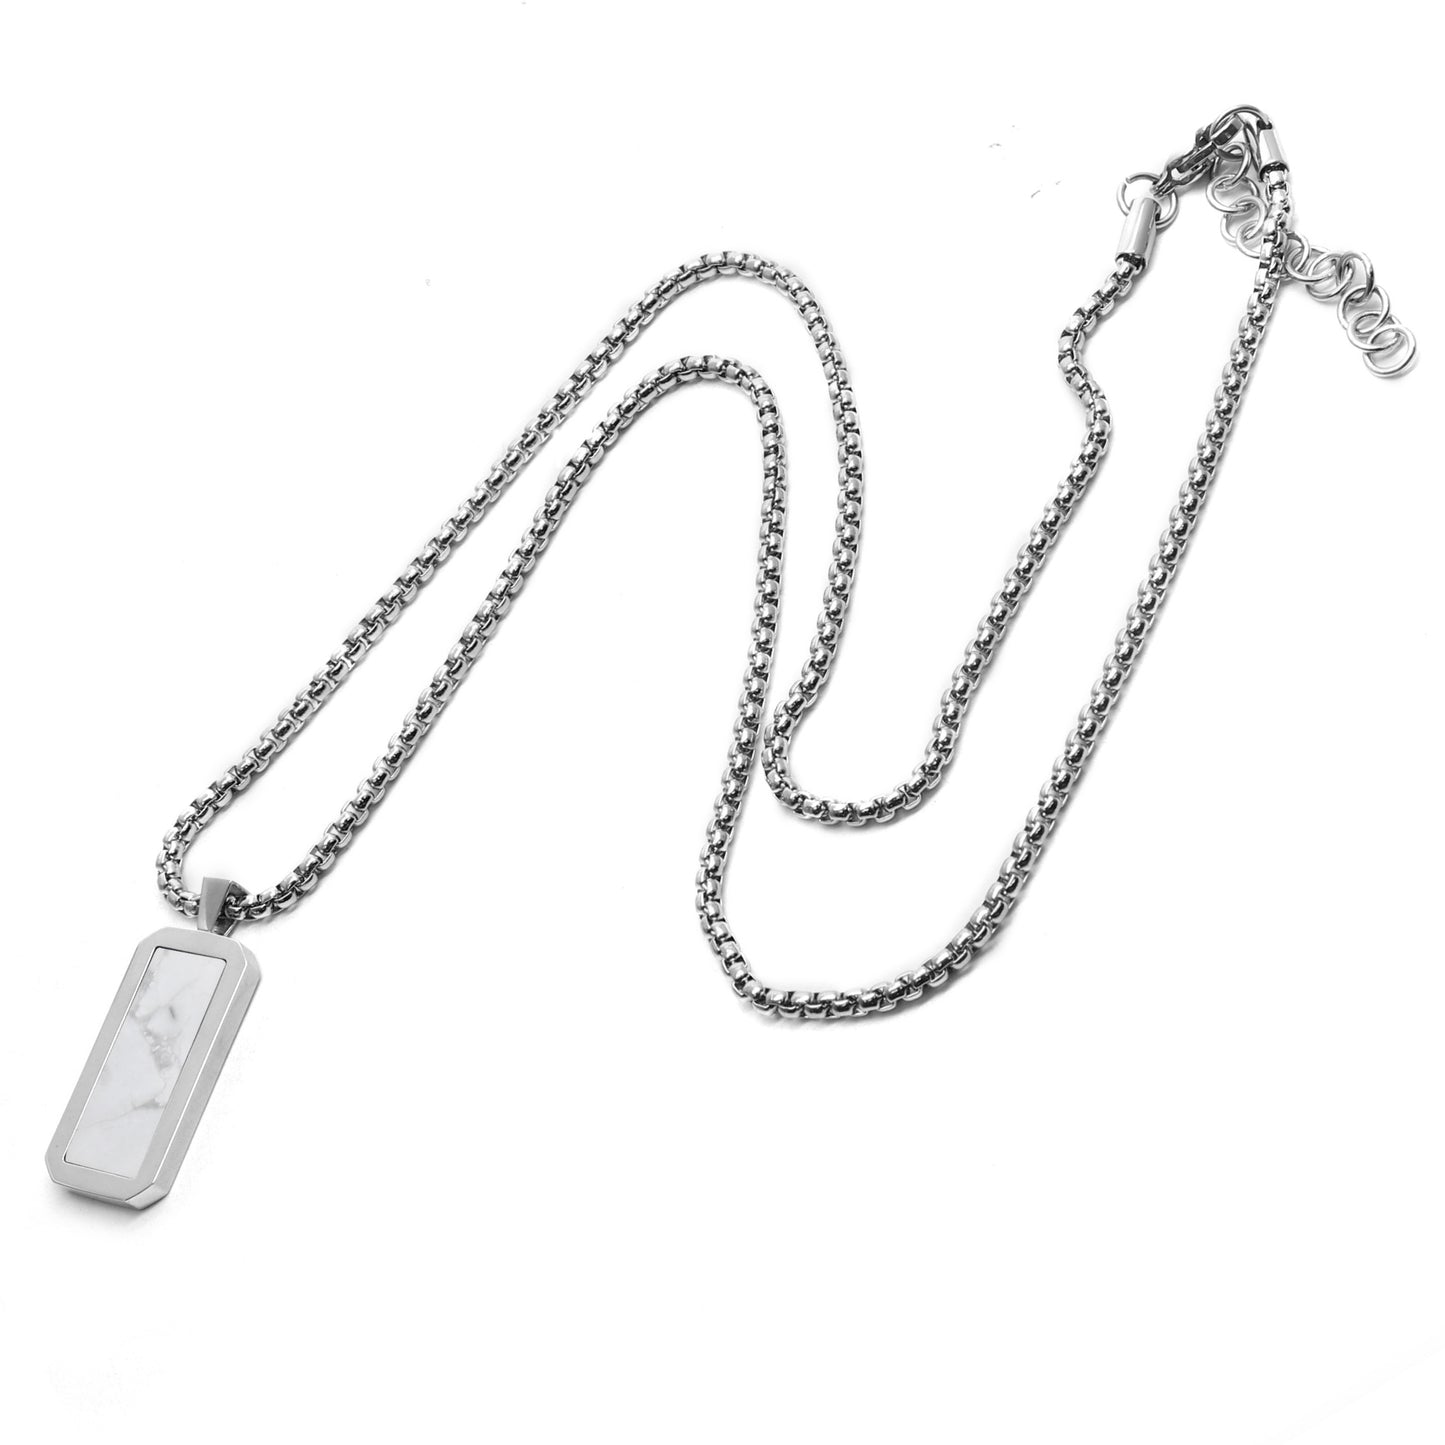 Necklaces - Silver Necklace With Rectangle Howlite Pendant